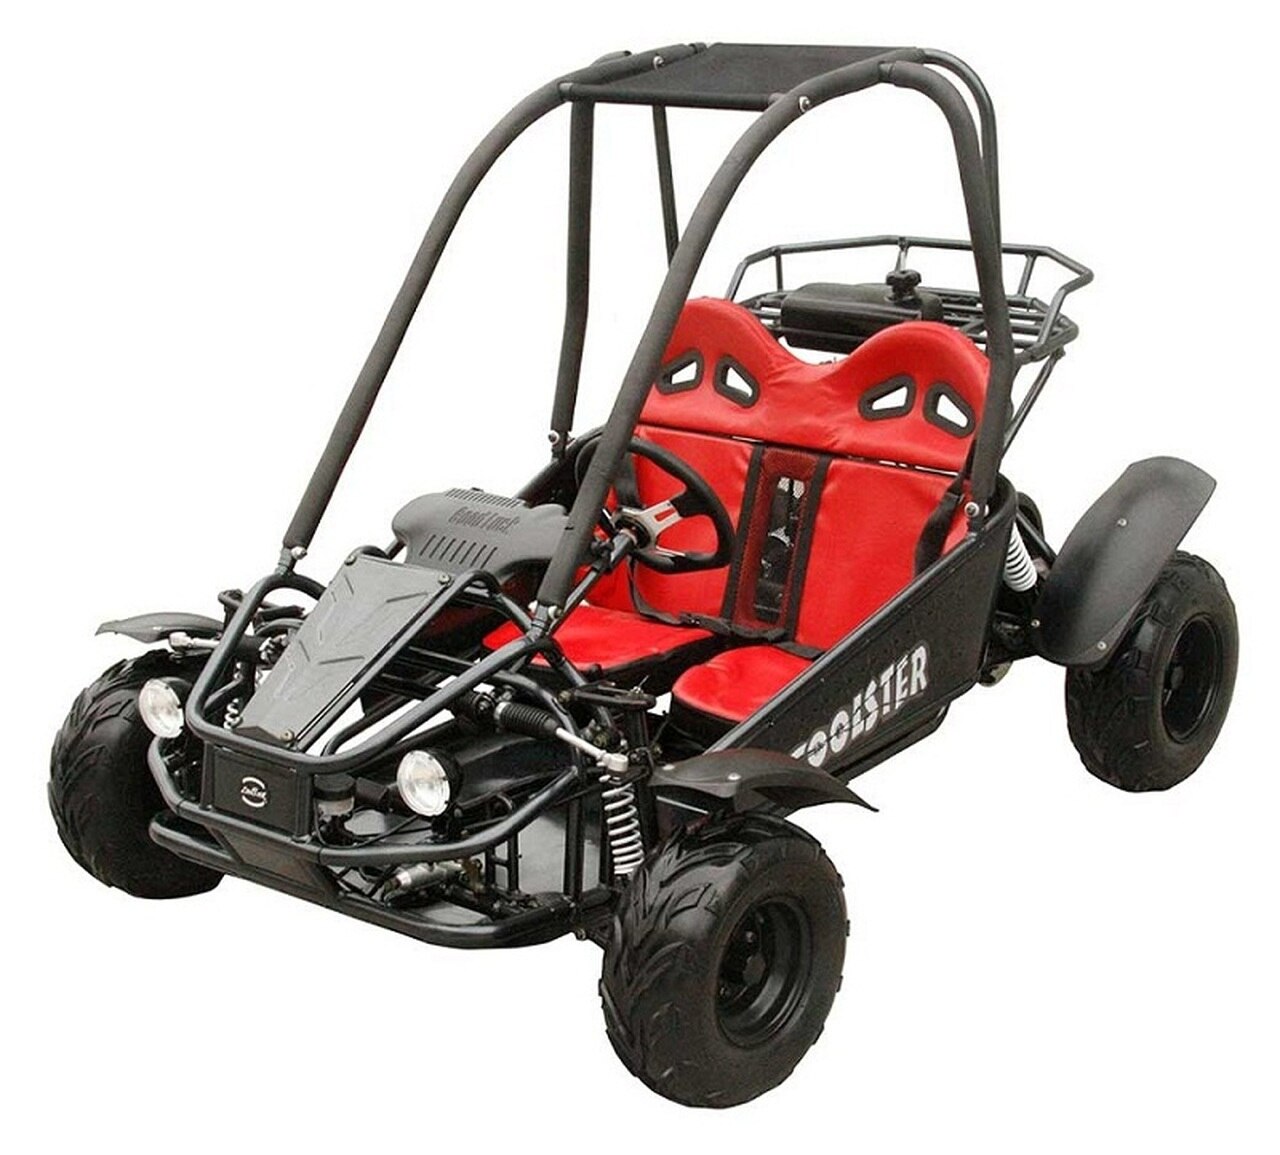 Coolster 125cc Go Kart 6125 - Click Image to Close